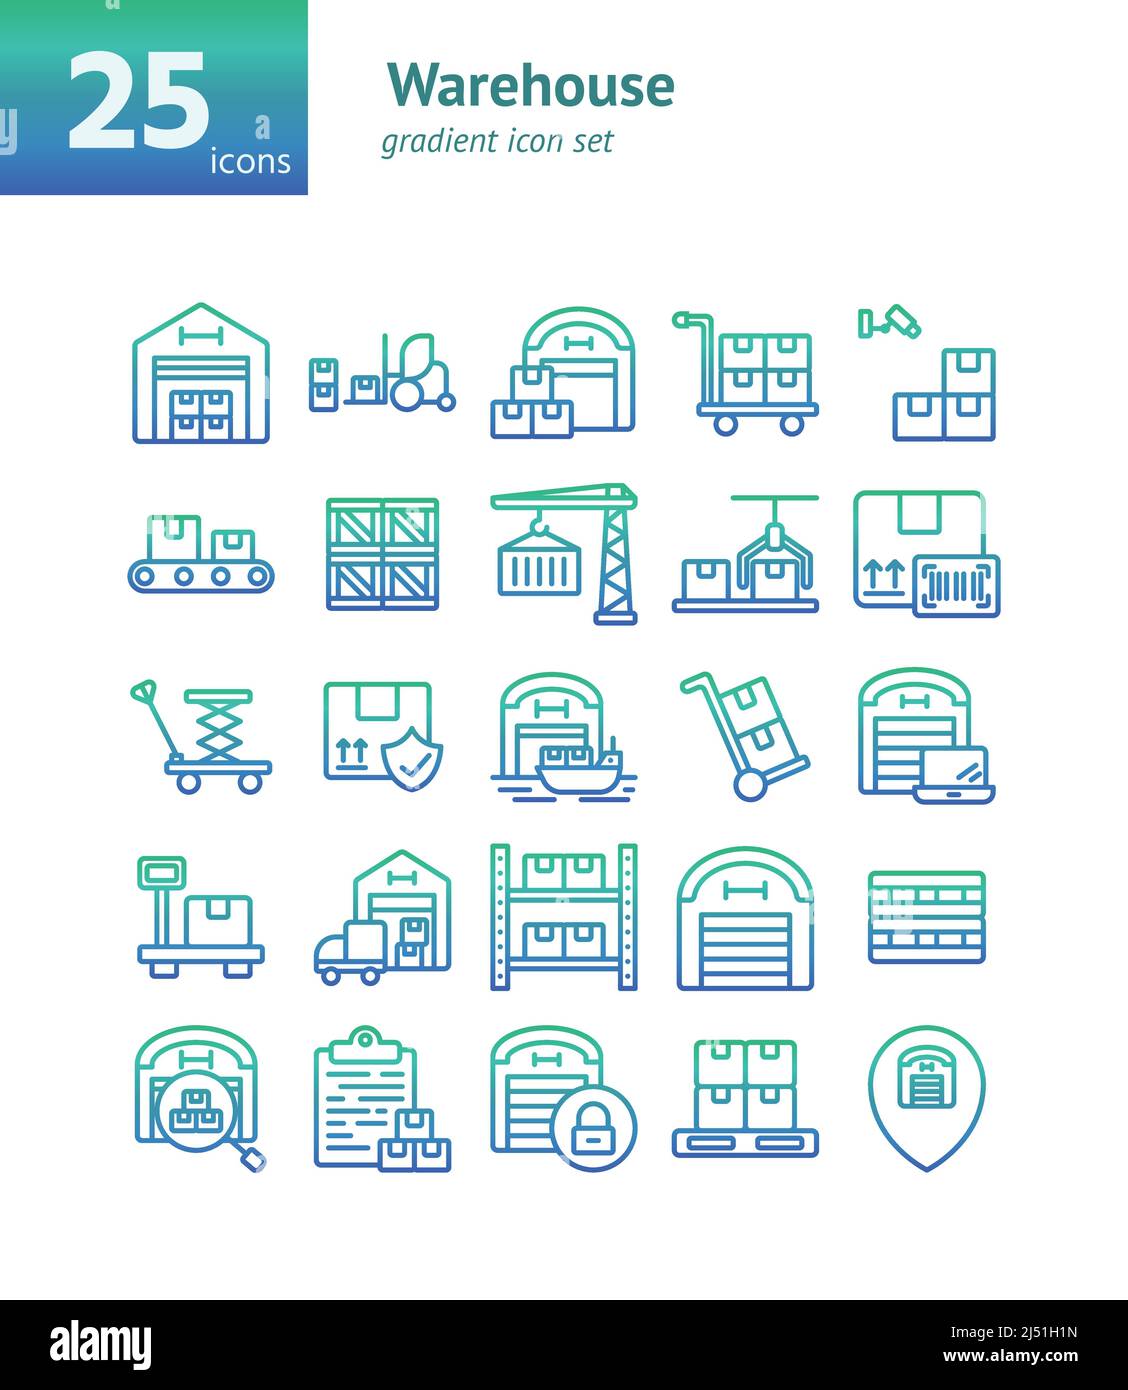 Warehouse gradient icon set. Vector and Illustration. Stock Vector